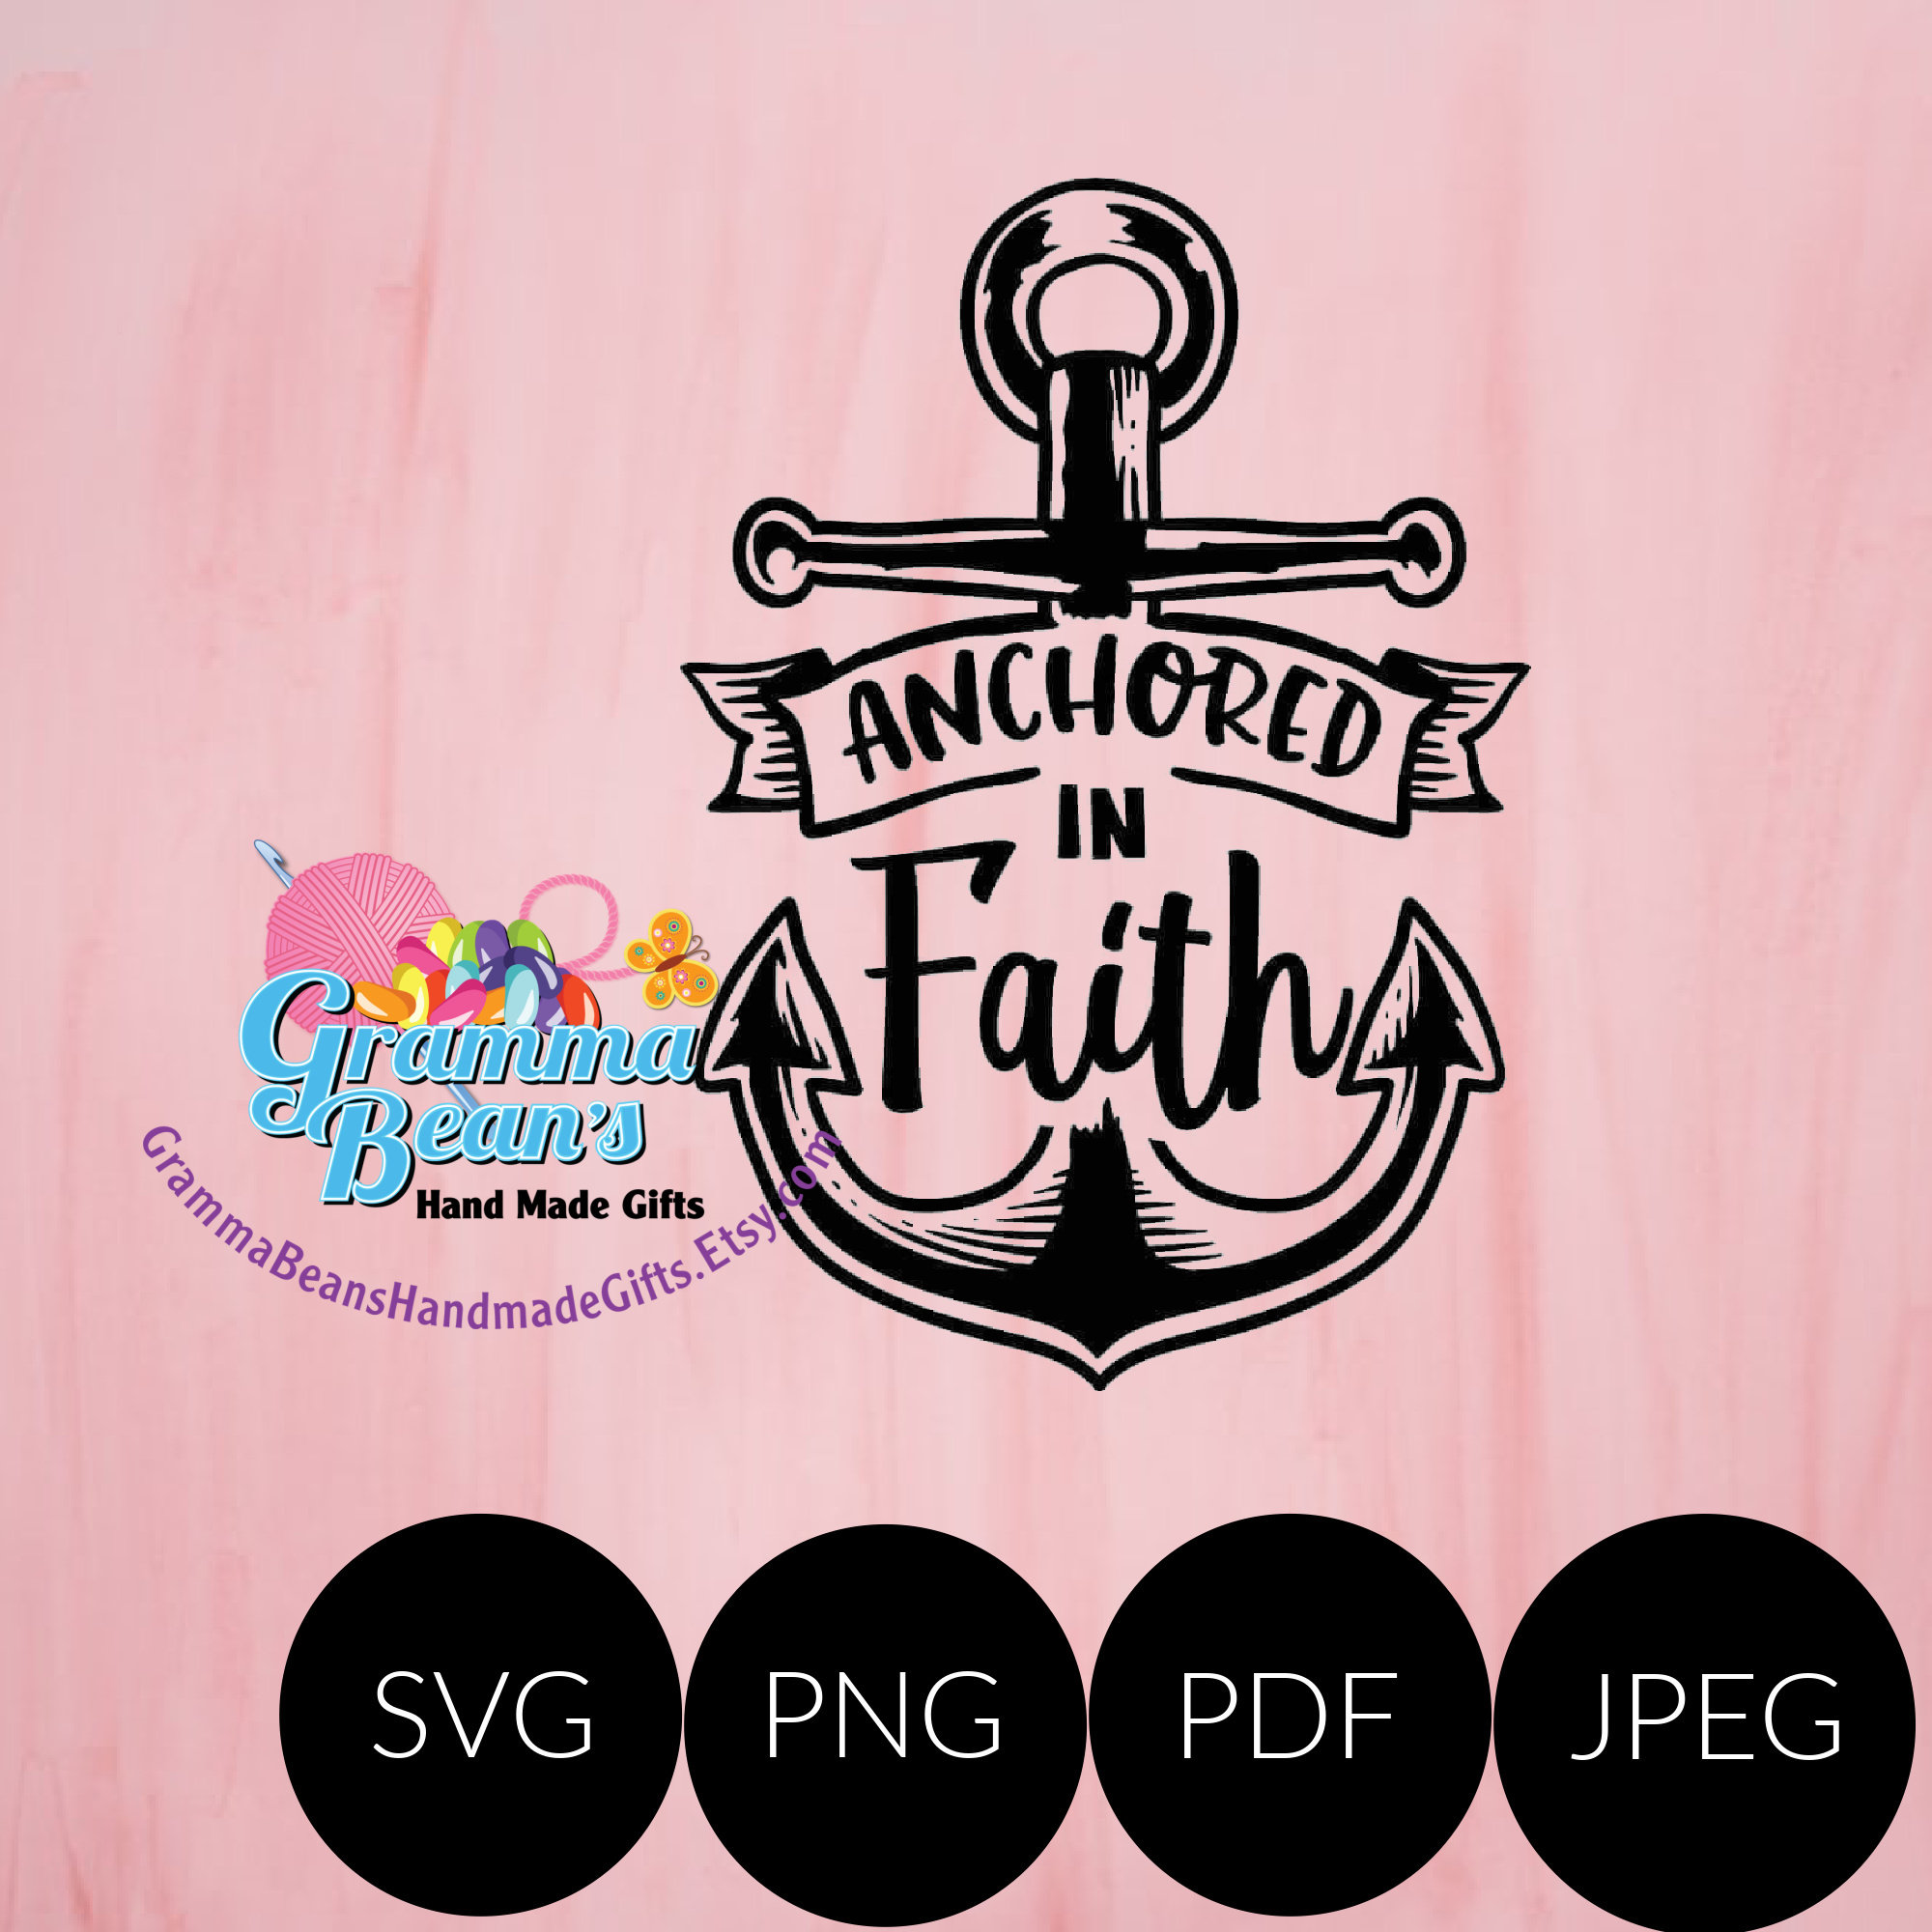 Anchored in Faith SVG, pdf, png and jpeg